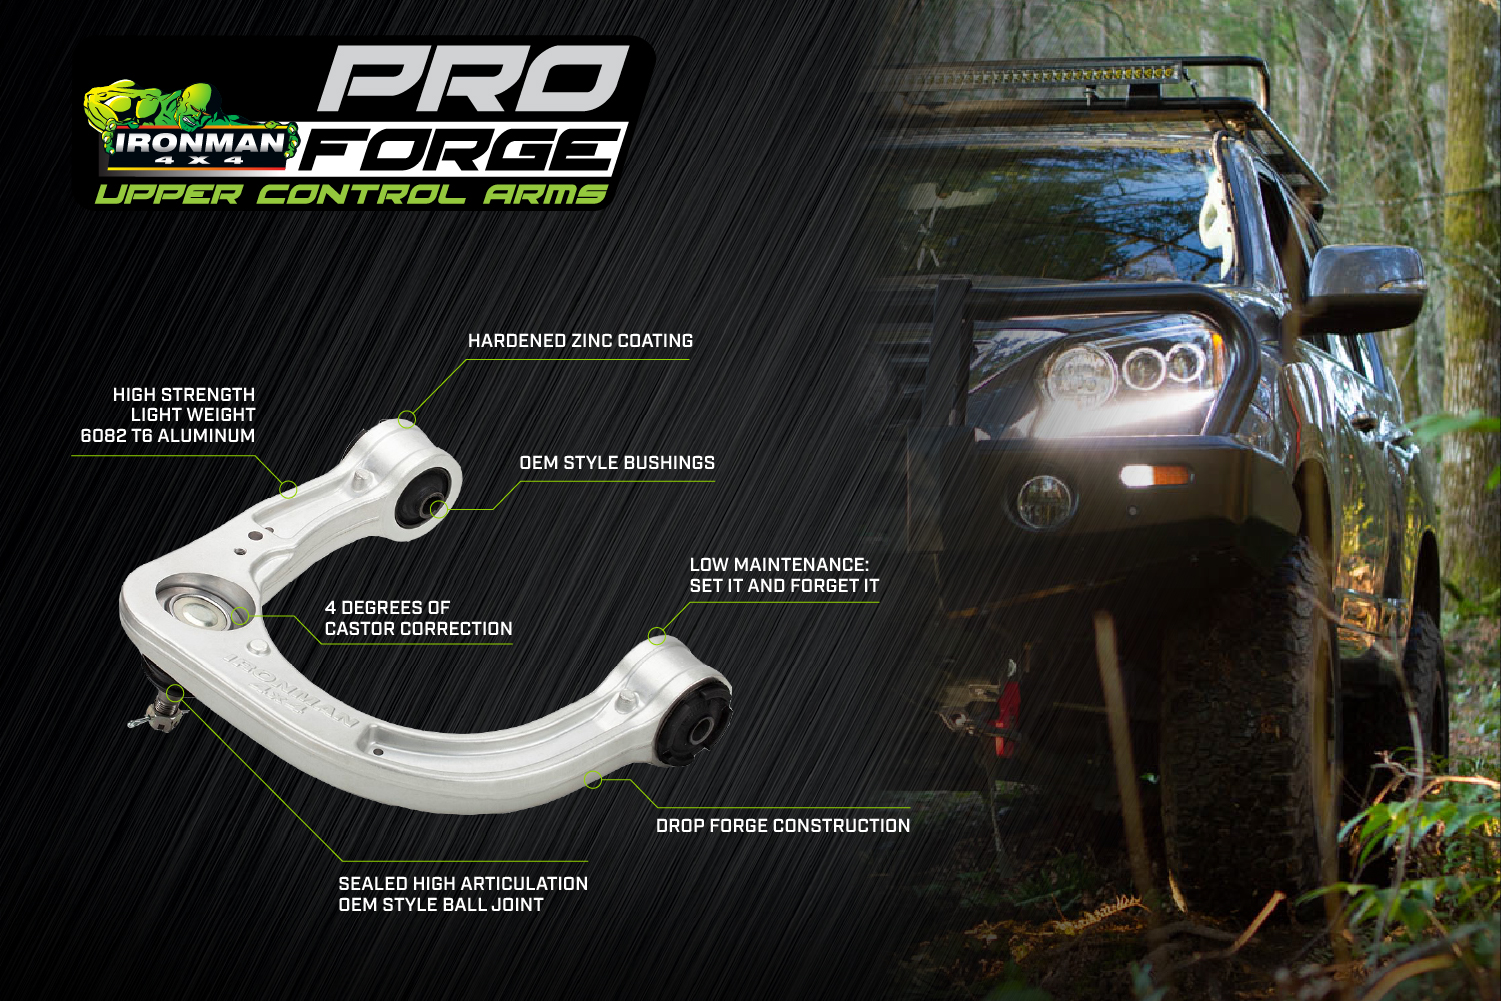 Pro Forge Upper Control Arms Suited ForLexus GX470/GX460